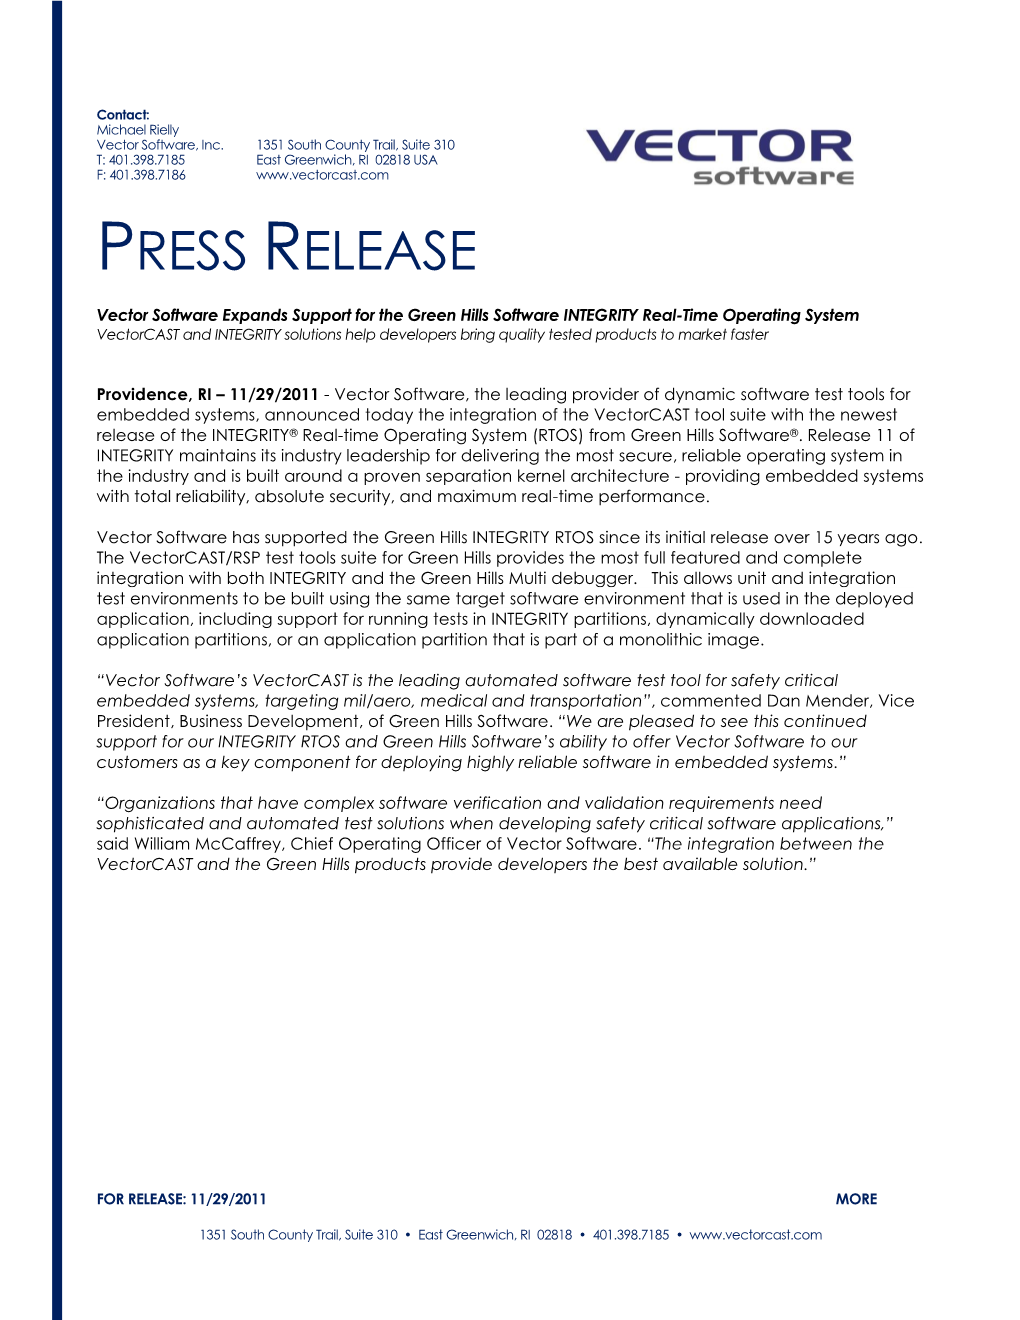 Vector Software Expands Support for the Green Hills Software